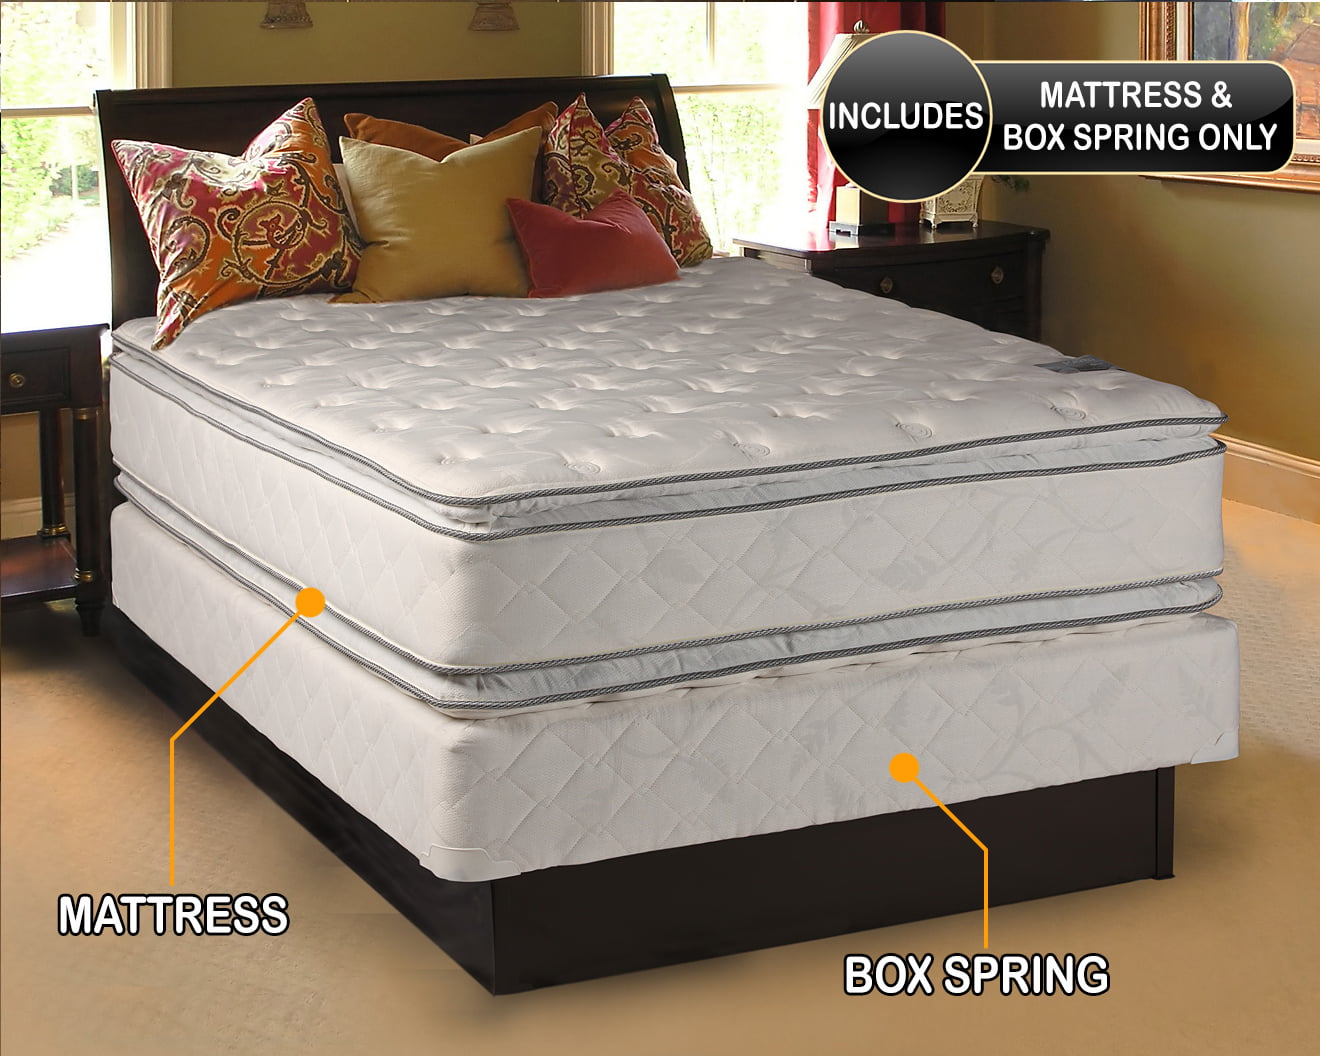 queen size pillow top mattress and boxspring price